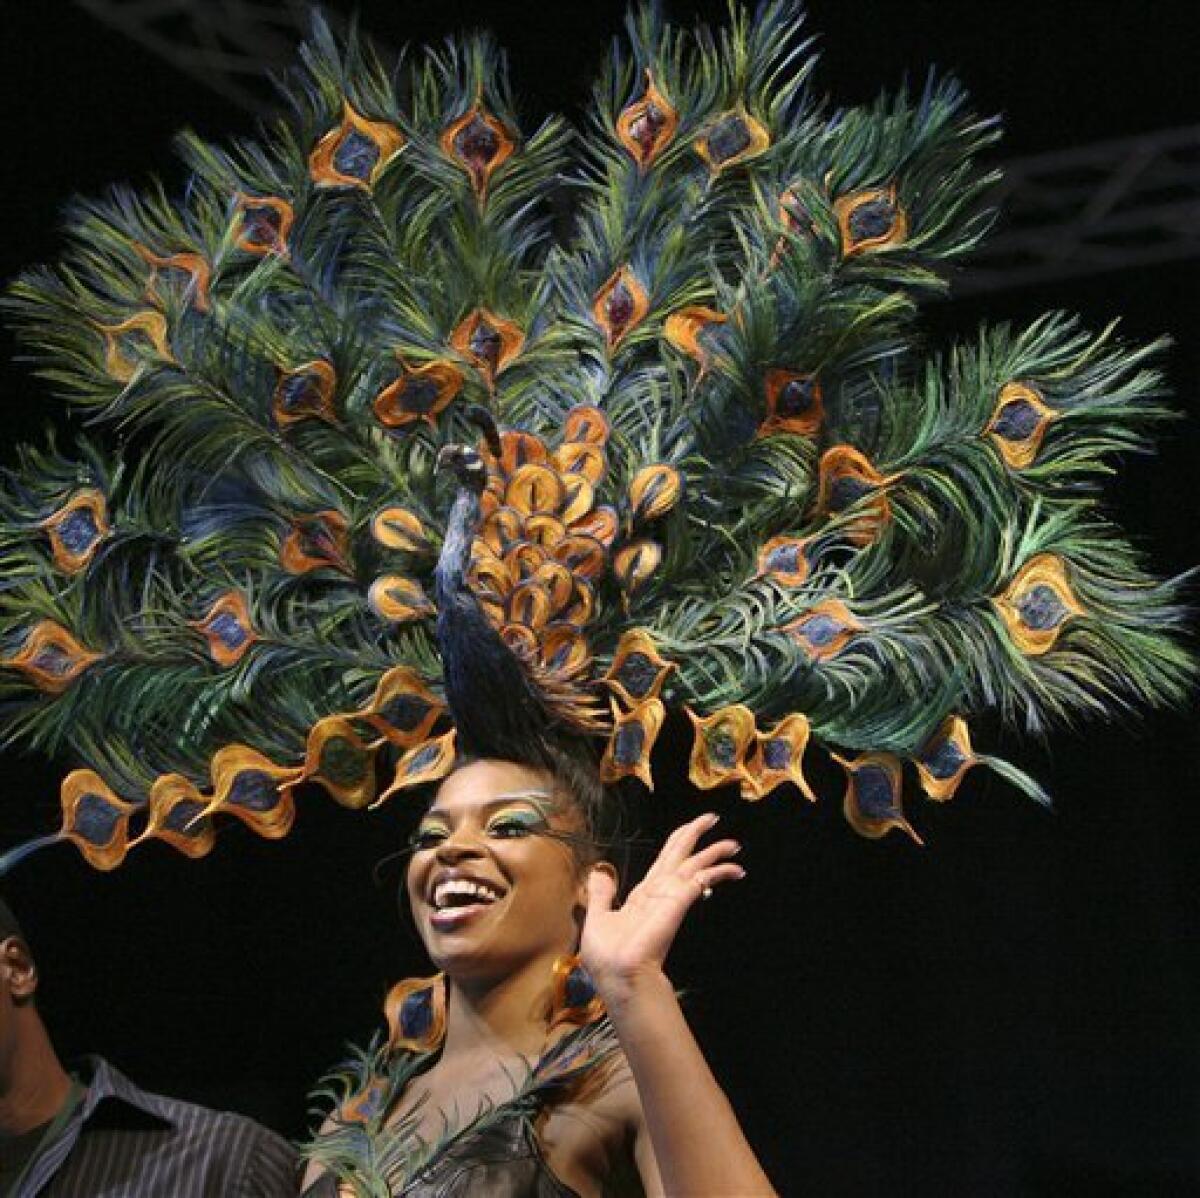 Model Amaris Brown smiles in Manchester, N.H., Thursday, April 23, 2009, after winning the International Fantasy Hair Competition with a hair style called "Proud Peacock" designed by Kevin Carter of The Artistry of Hair from Farmington Hills, Mich. (AP Photo/Jim Cole)